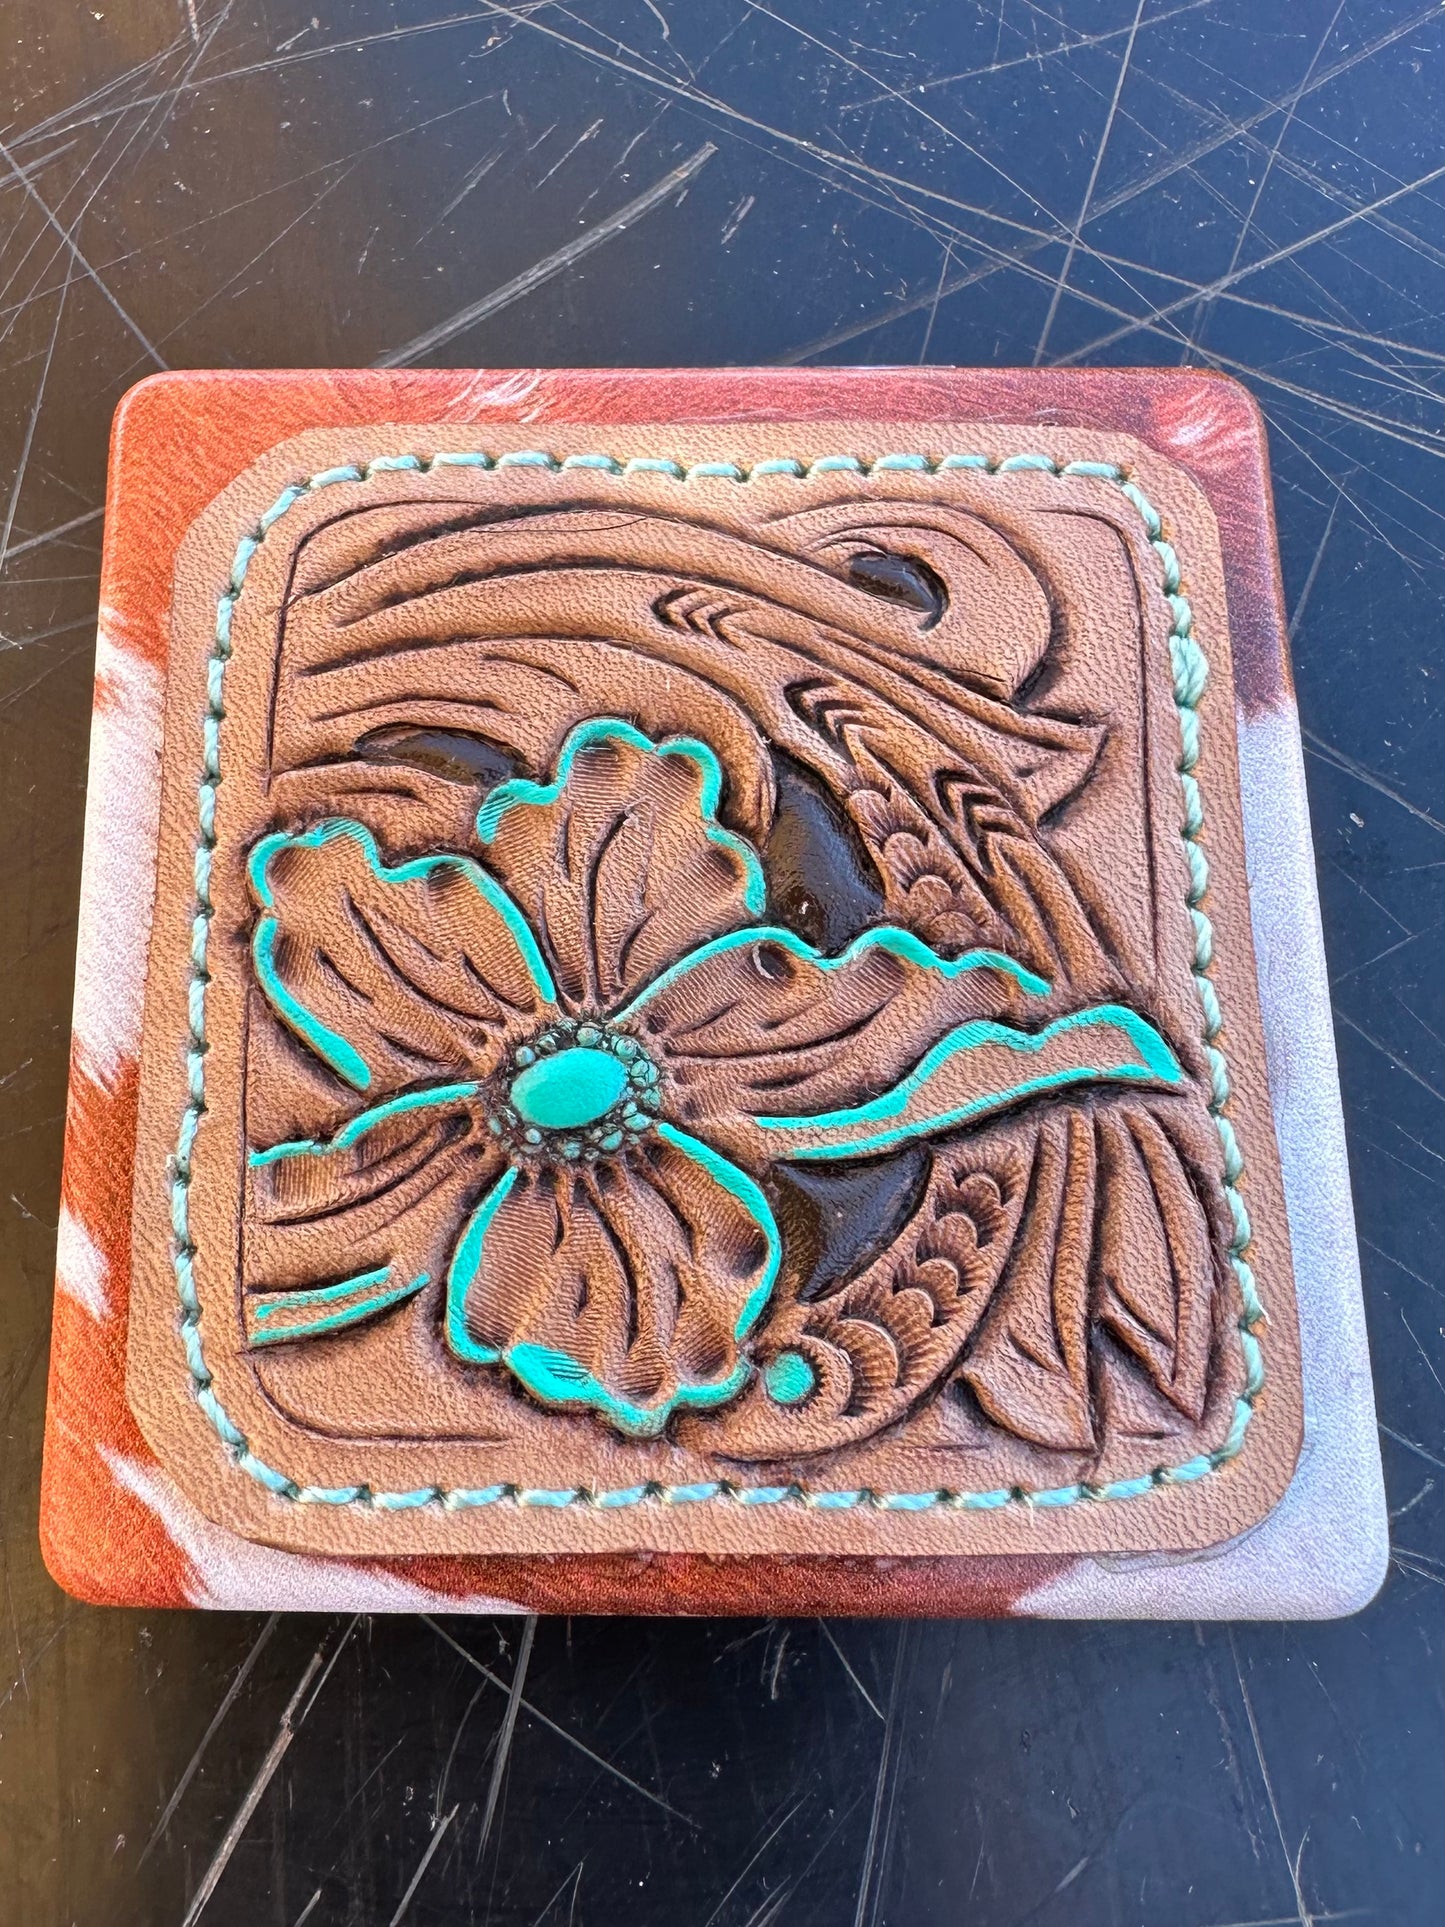 Western tooled leather floral patch compact mirror